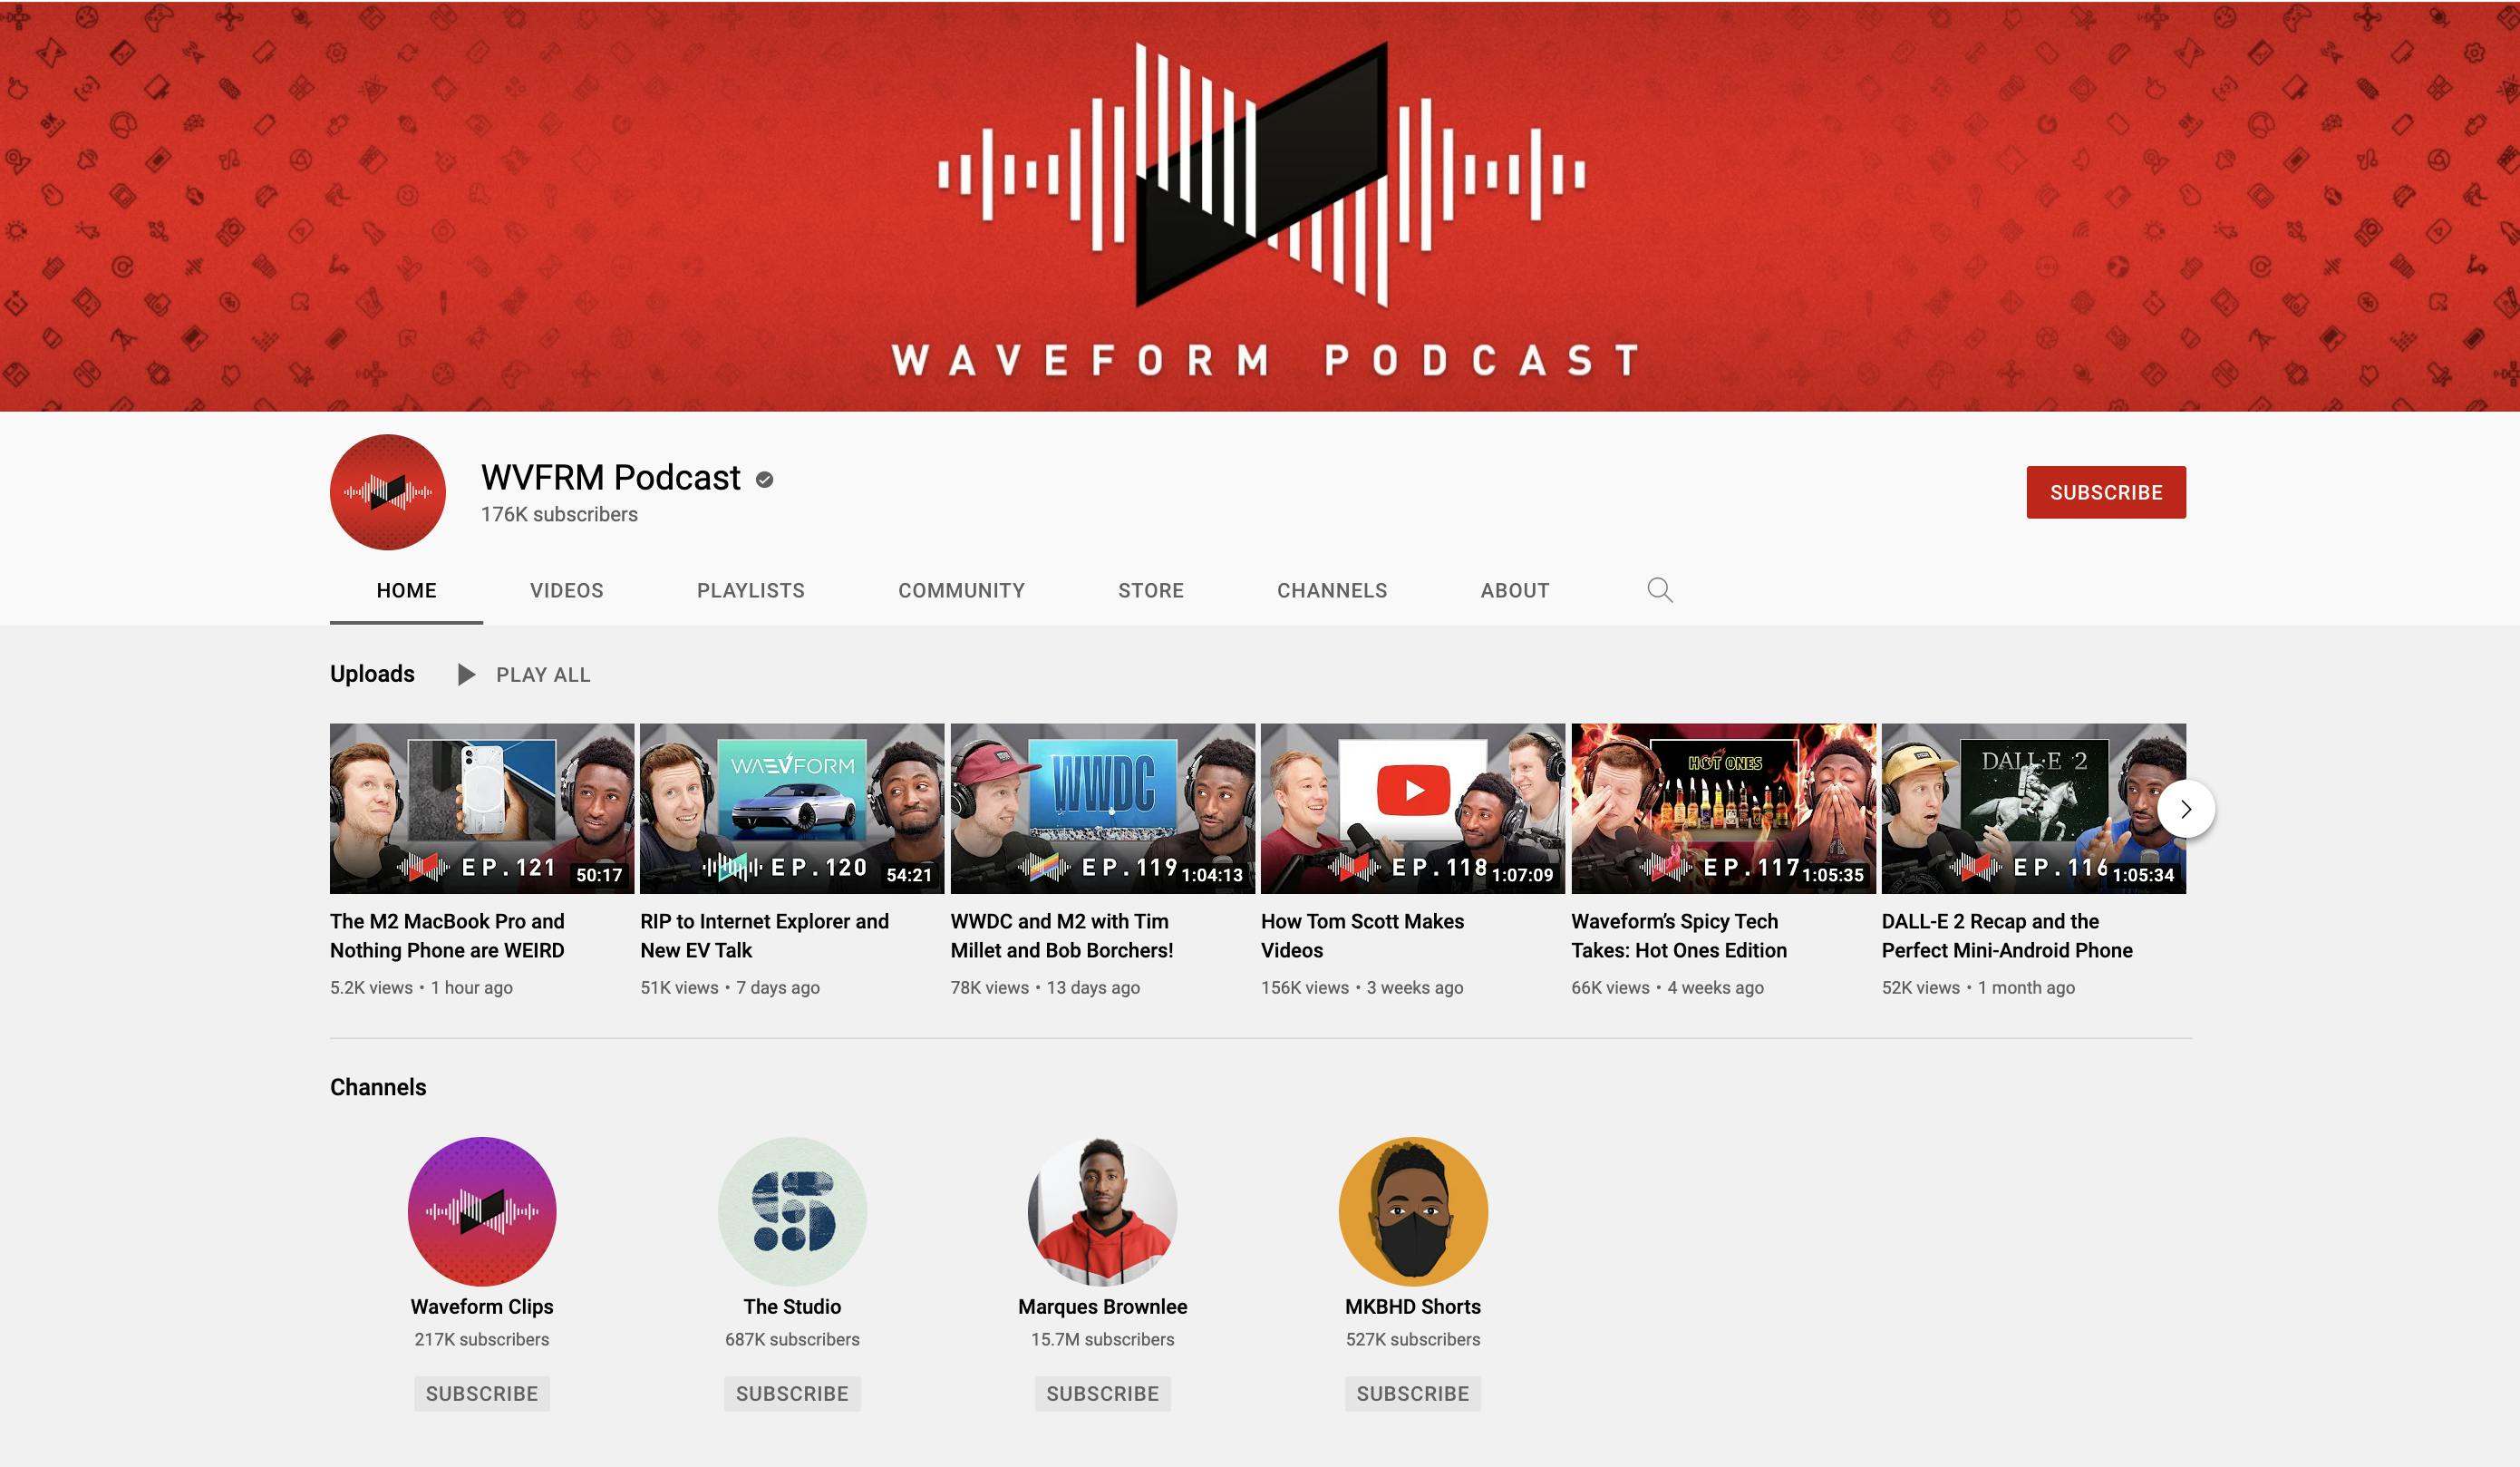 WVFRM Podcast YouTube channel homepage with red banner and video thumbnails